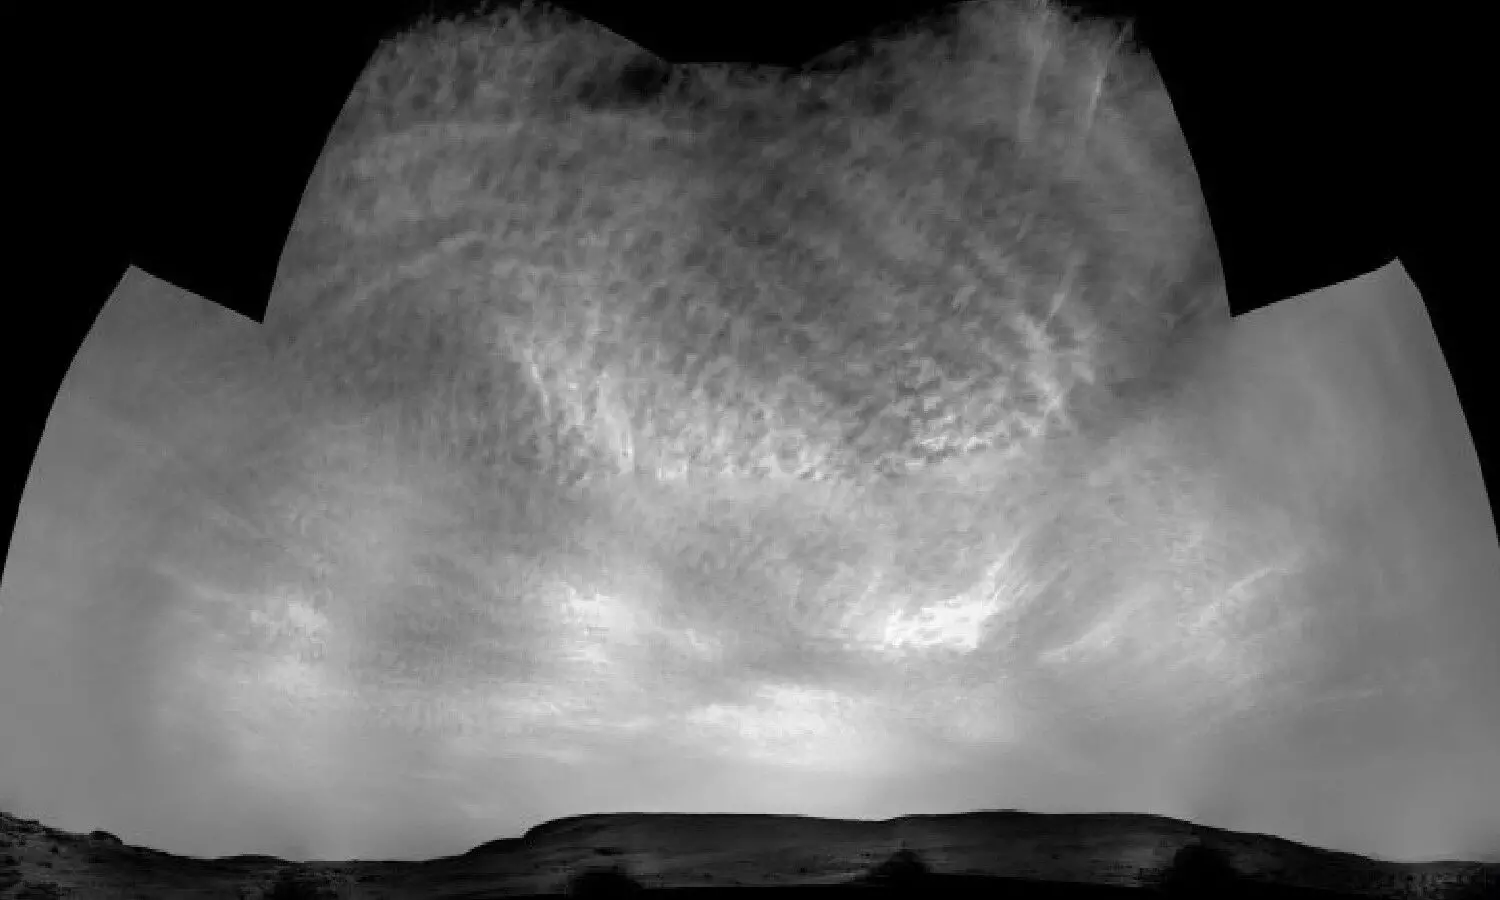 Clouds on Mars, but NASAs Curiosity rover has taken photos of the clouds above the Gayle crater.